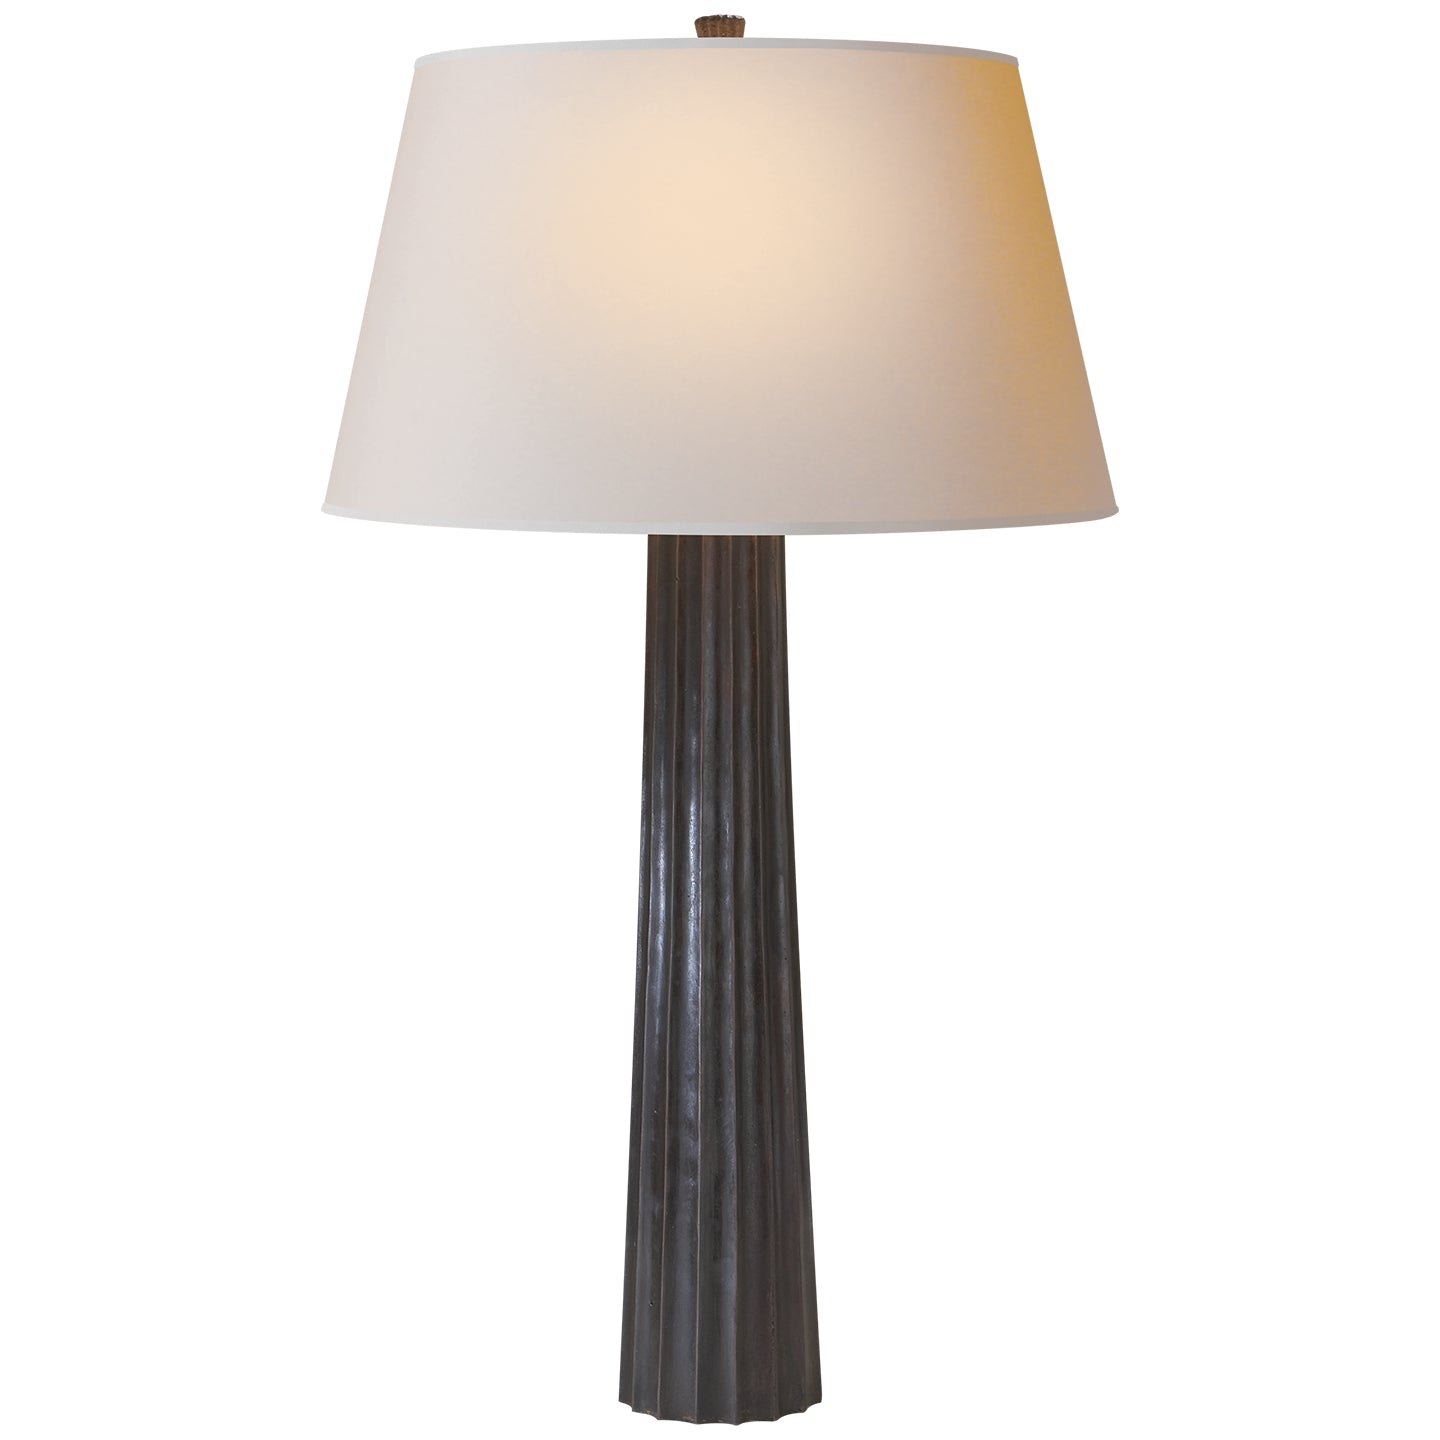 Visual Comfort Signature - CHA 8906AI-NP - One Light Table Lamp - Fluted Spire - Aged Iron